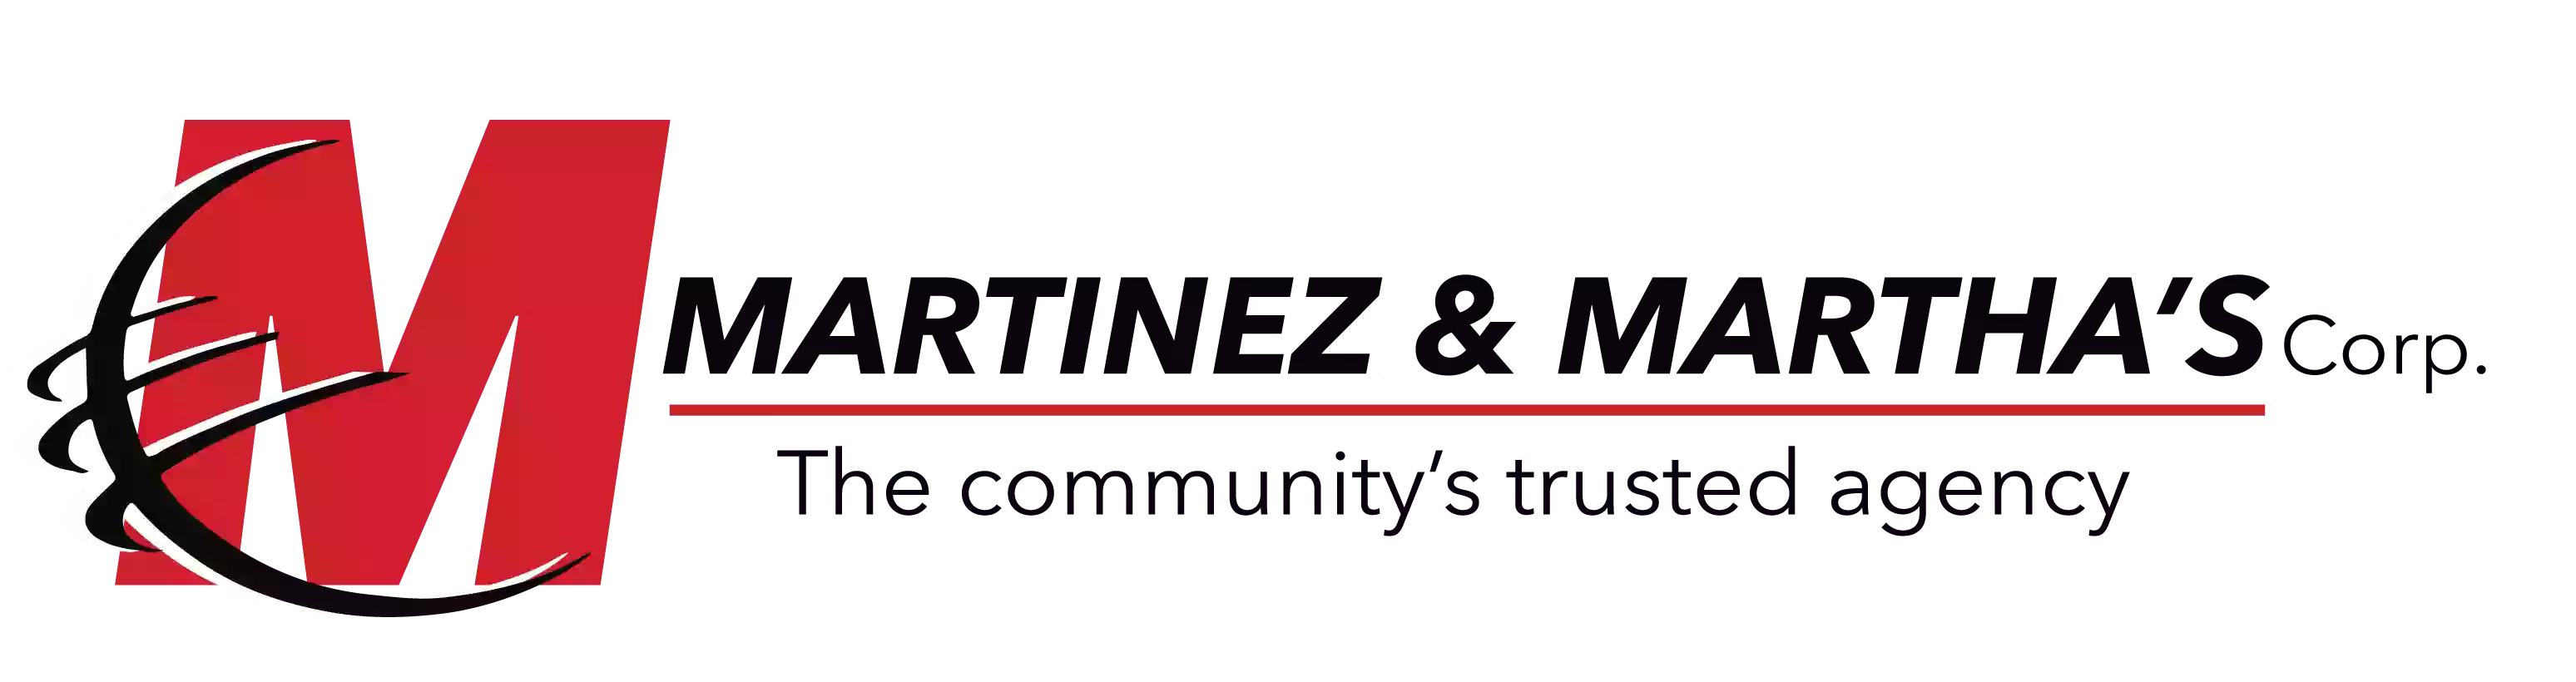 Martinez Corp. Taxes and Insurance